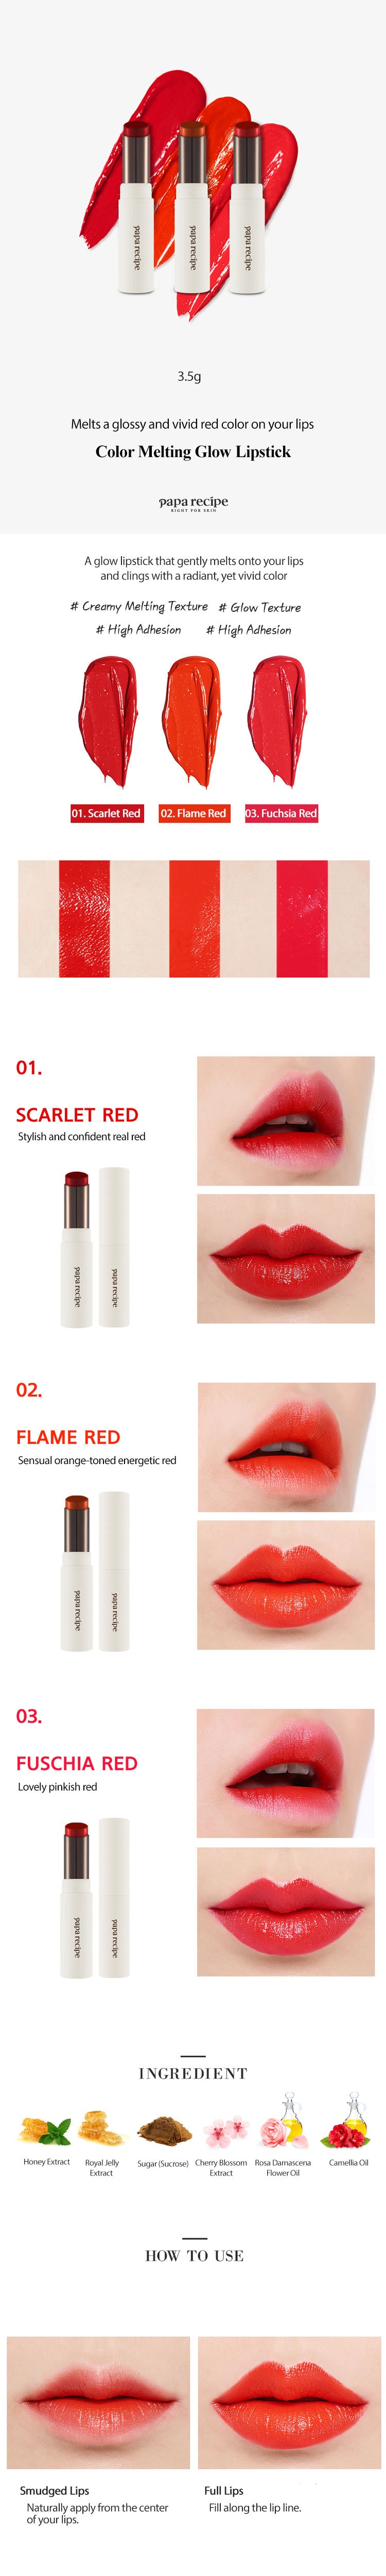 Color Melting Glow Lipstick - 02. Flame Red  3.5g